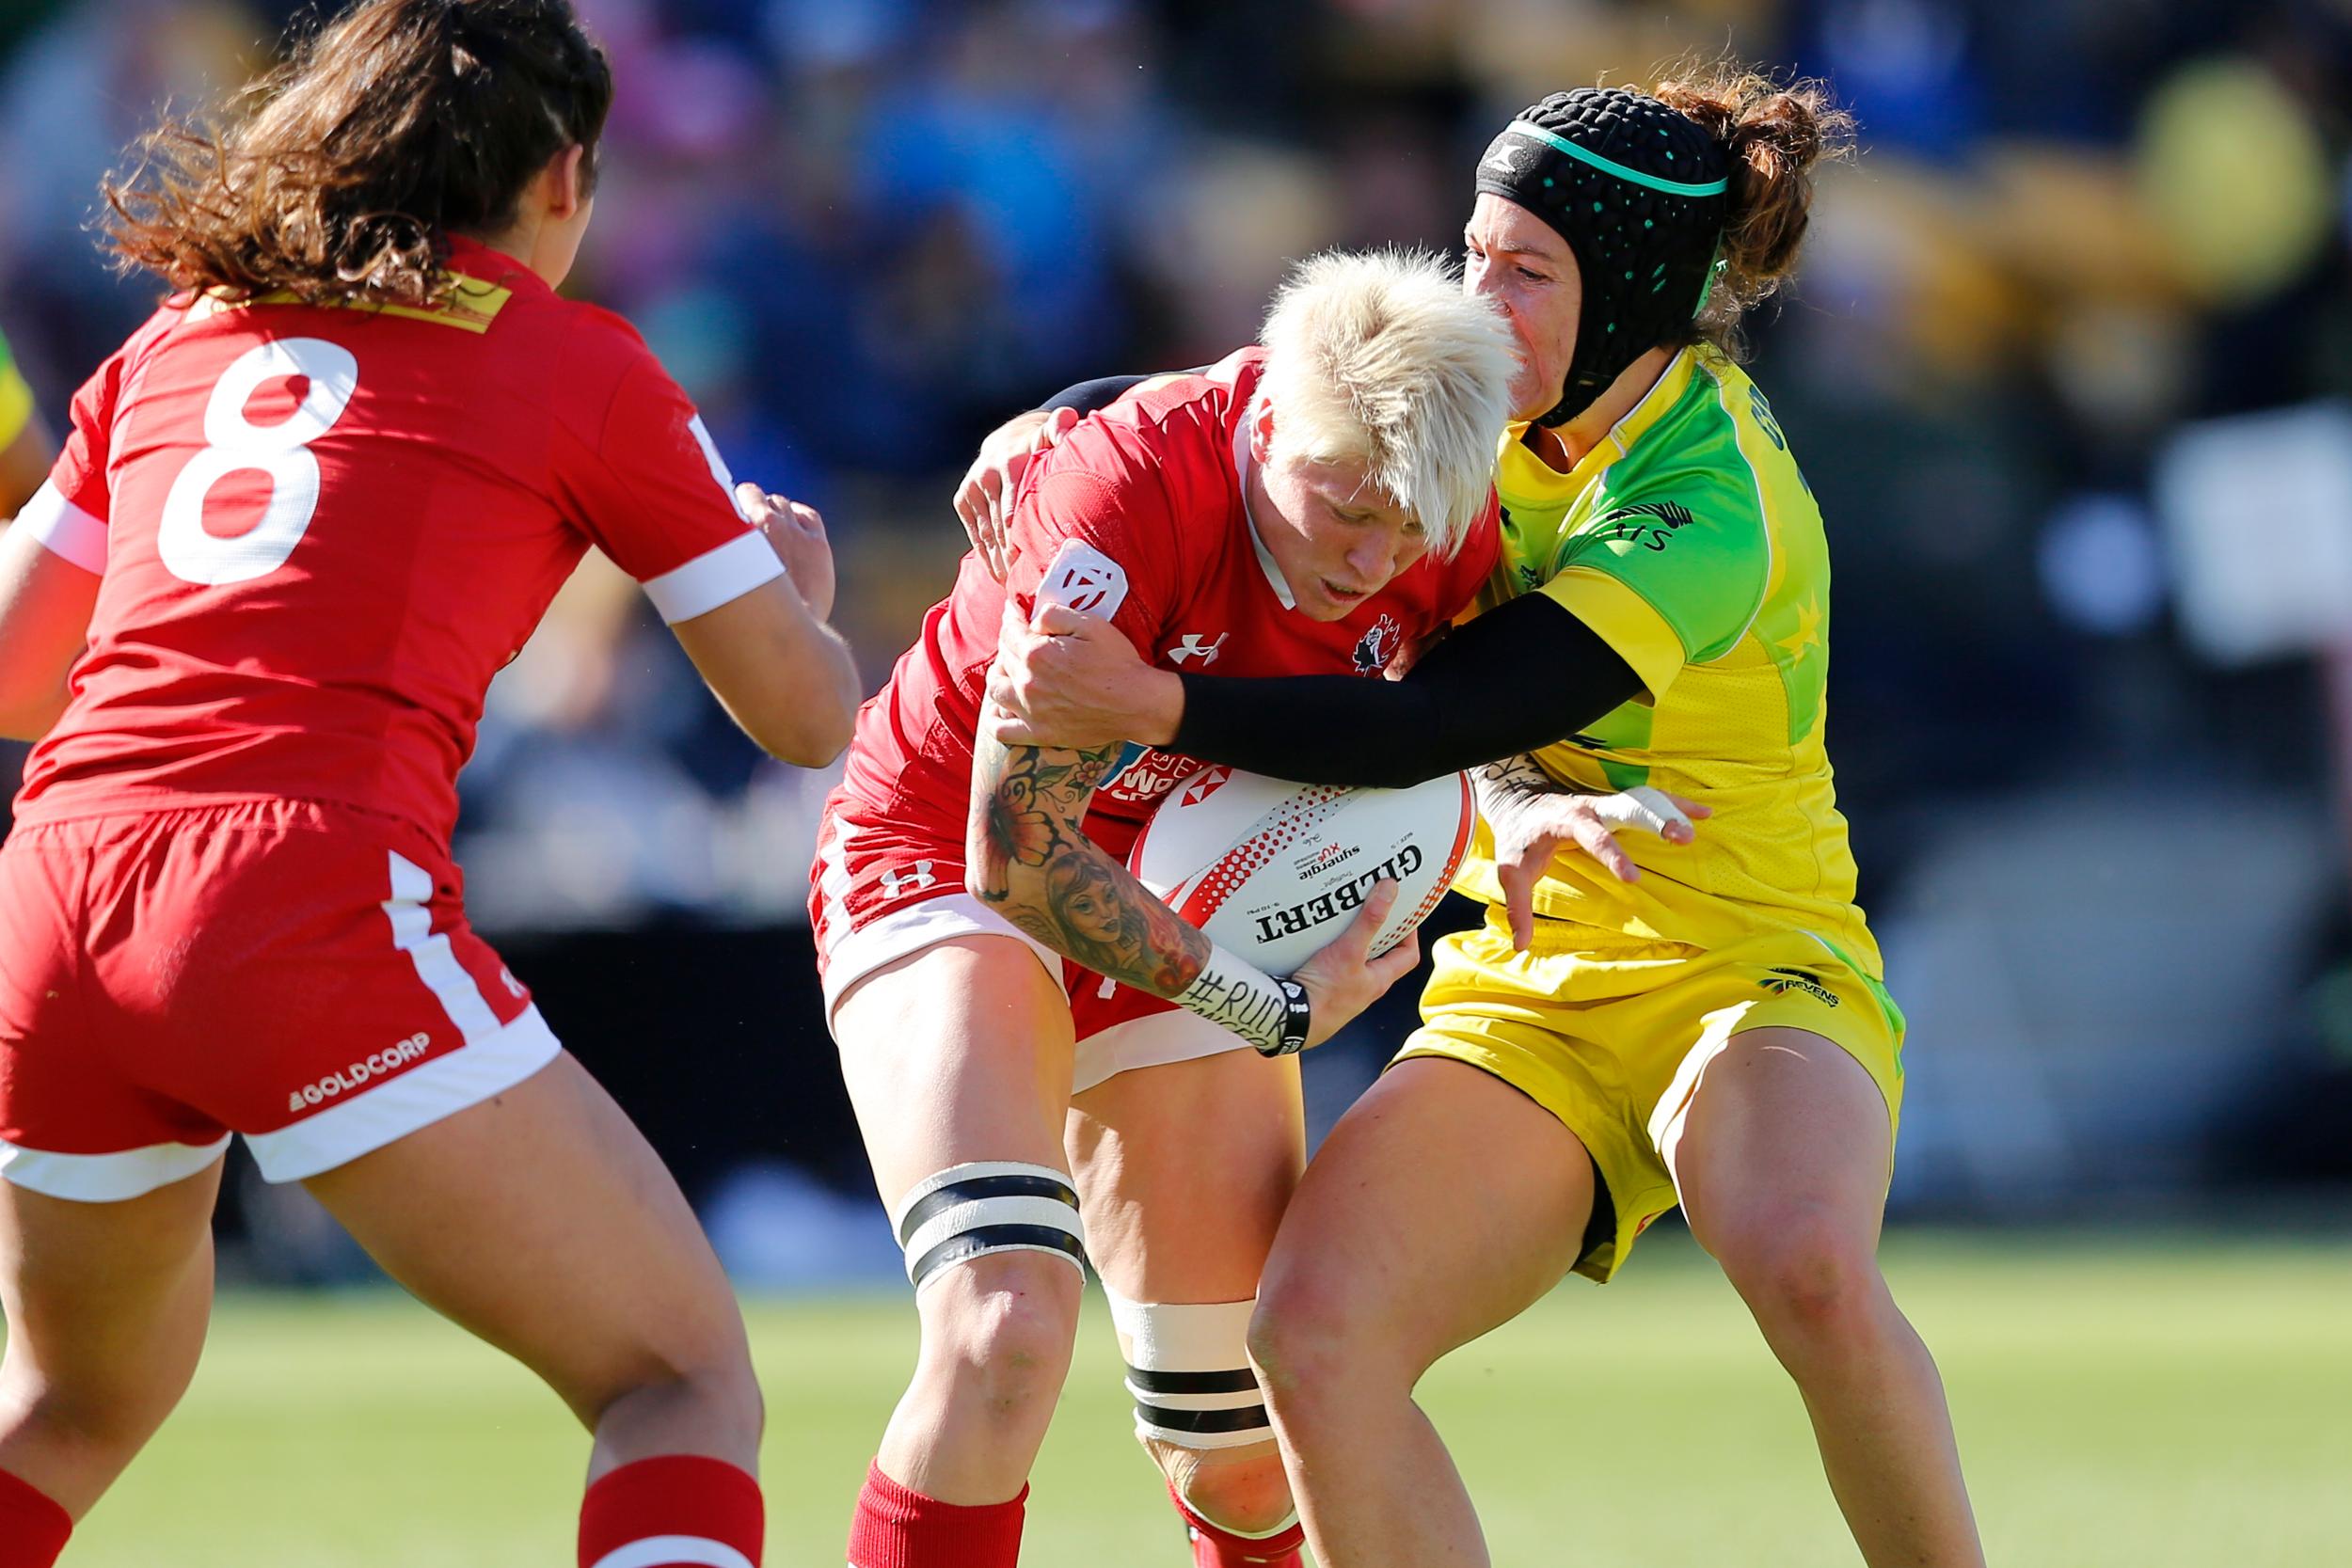 Jen Kish of Canada maintains possession as Australia comes in for the tackle at Atlanta 7s (Photo: Mike Lee @ KLC Fotos).